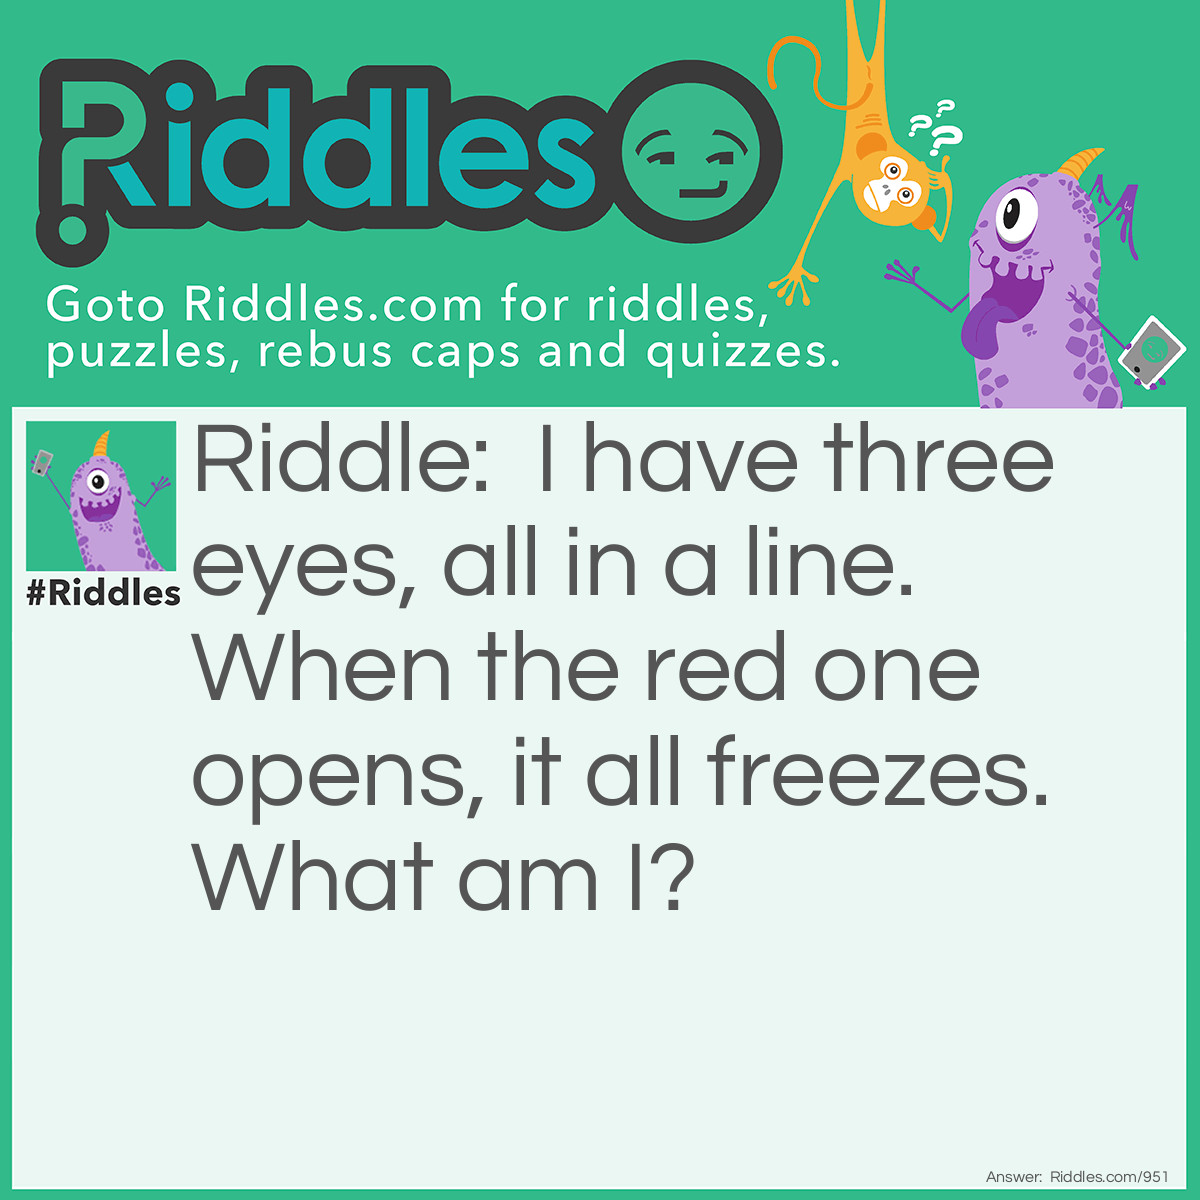 Riddle: I have three eyes, all in a line. When the red one opens, all freezes.
What am I? Answer: Traffic light.